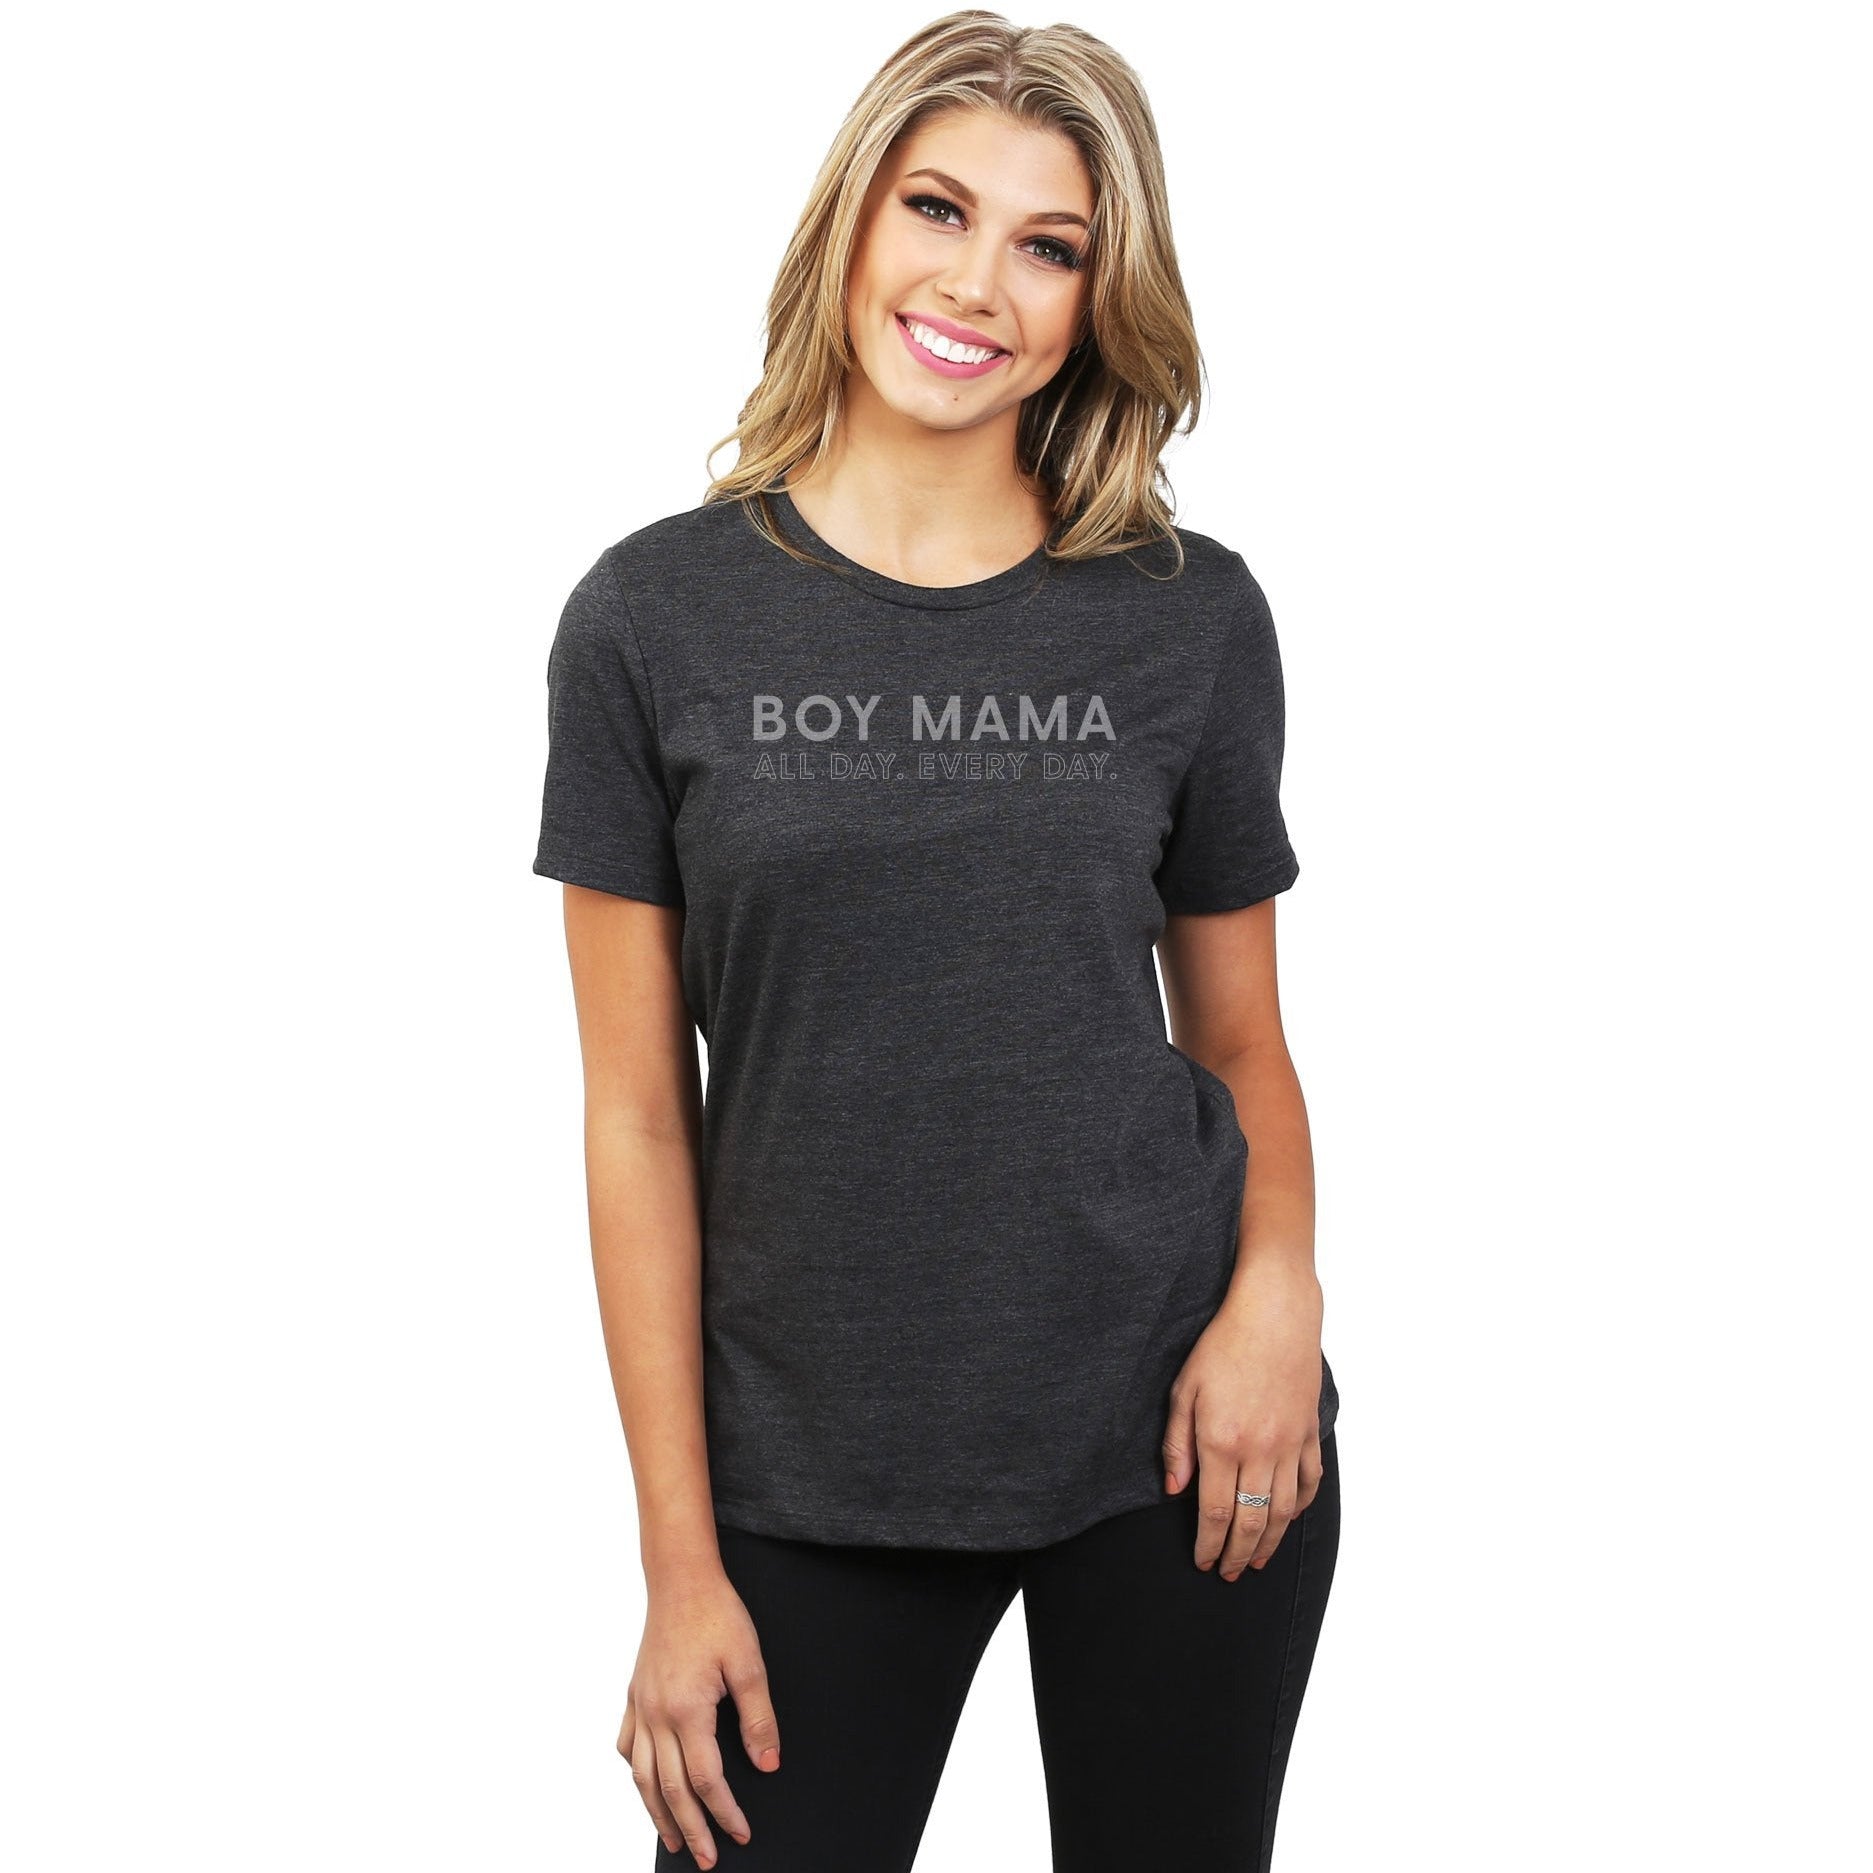 Boy Mama All Day Every Day Women's Relaxed Crewneck T-Shirt Top Tee Charcoal Model
